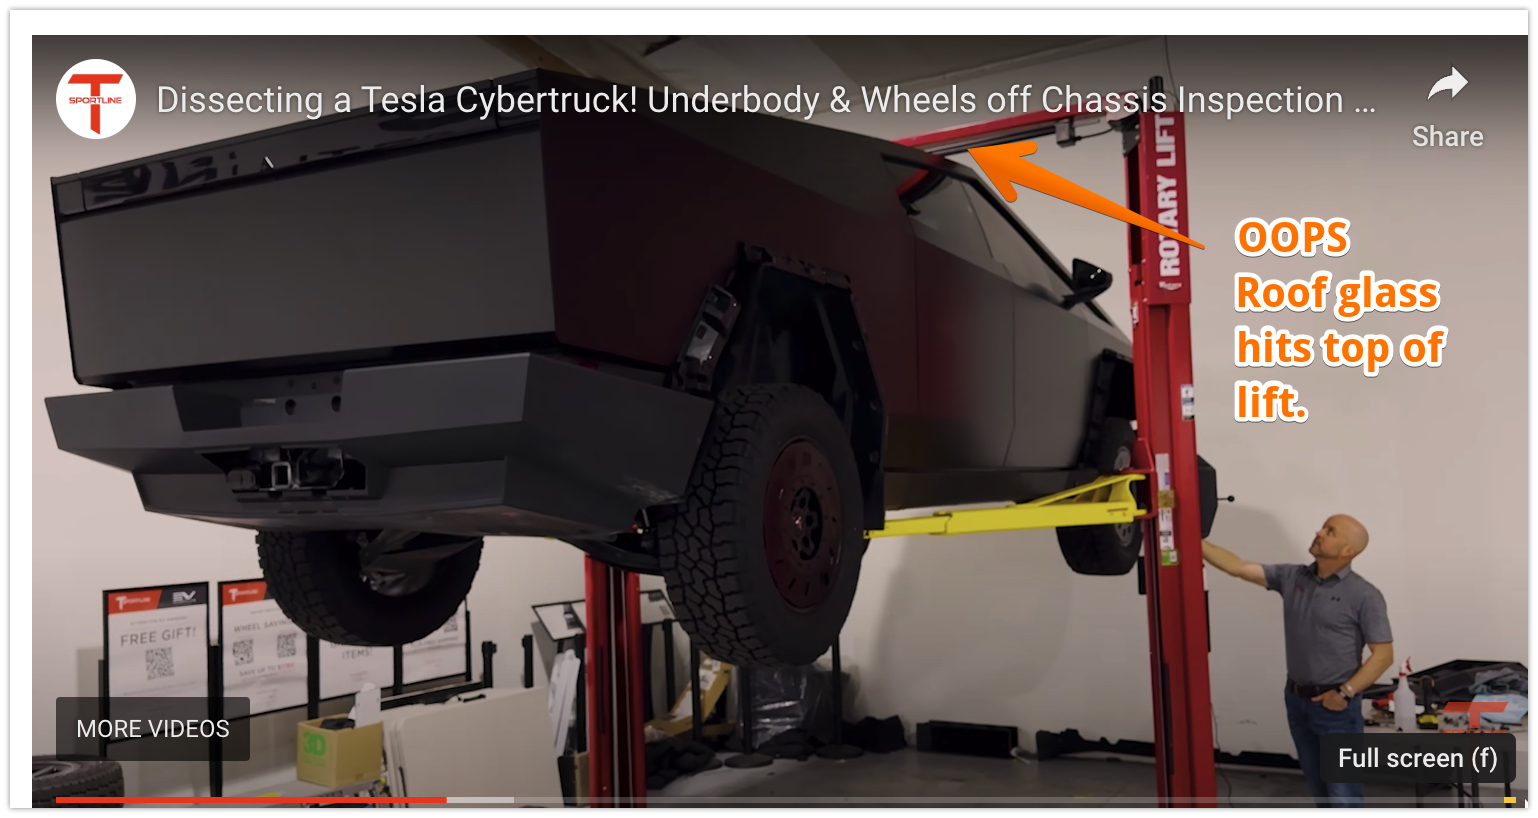 Tesla Cybertruck Dissecting a Cybertruck! Underbody, Chassis, Skid Plates Inspection & Walkthrough oops